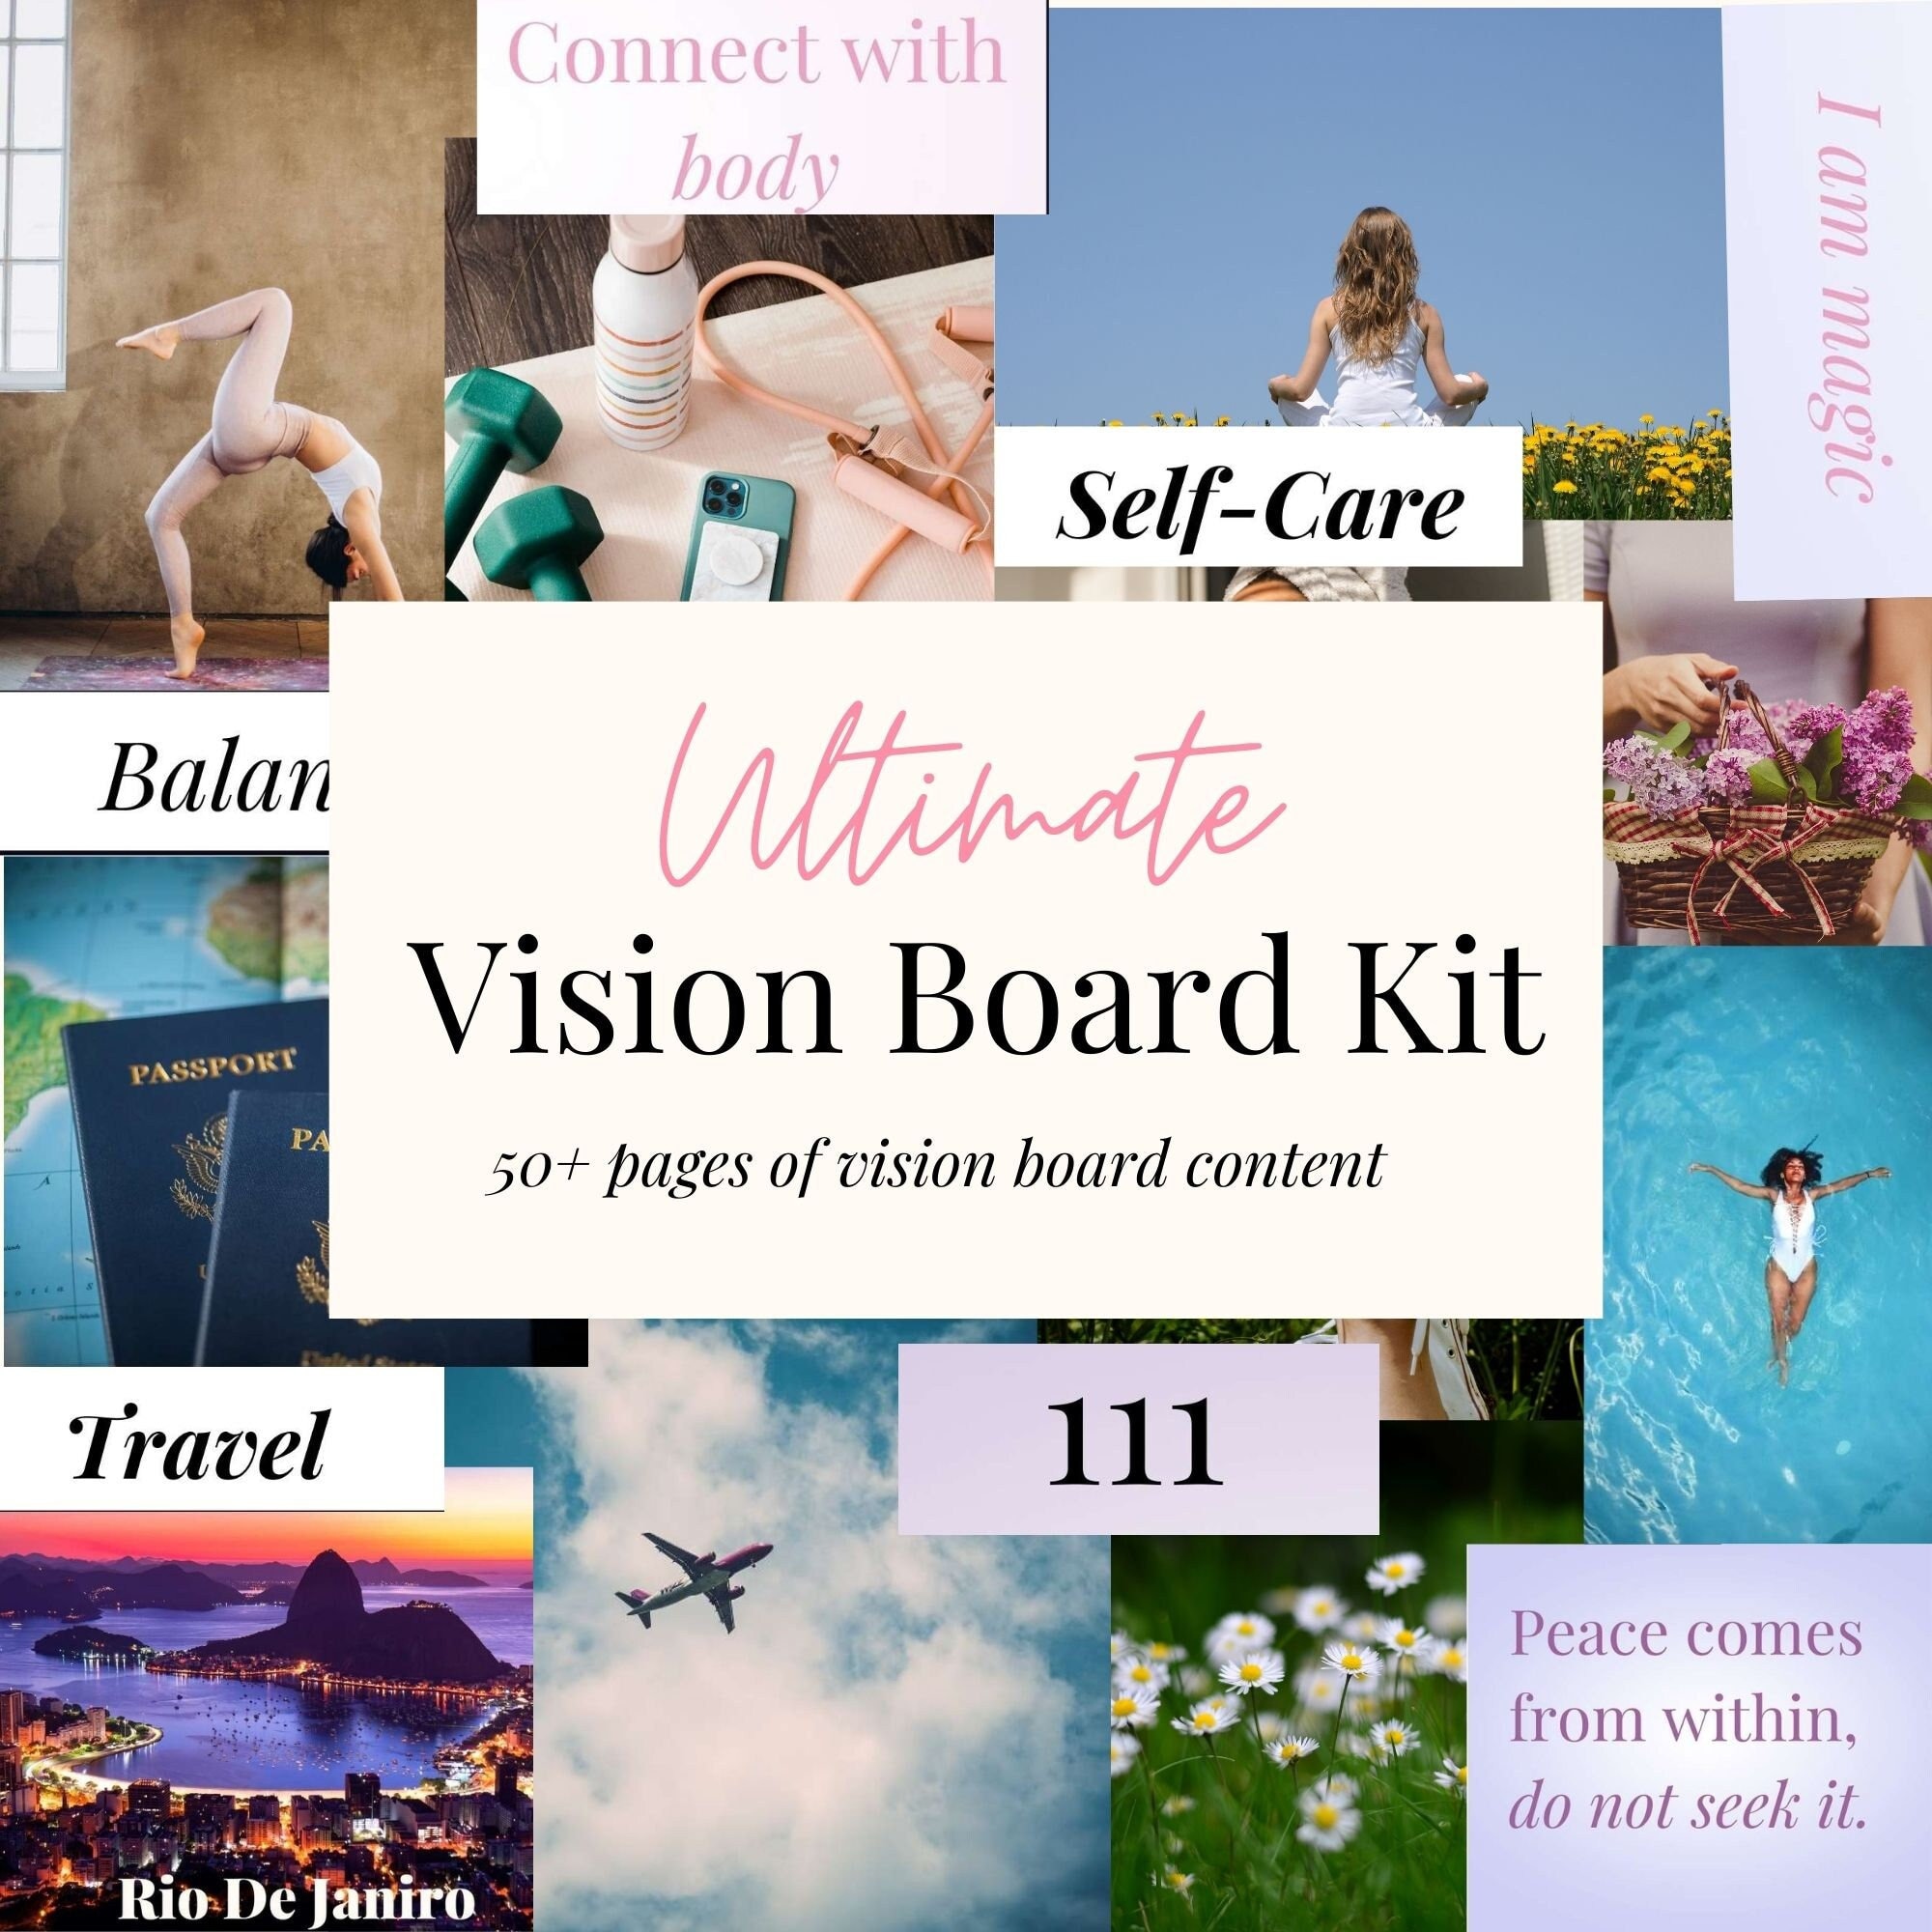 calmoura vision board kit for adults supplies - vision board supplies kit  for collage, scrapbooking - dream board